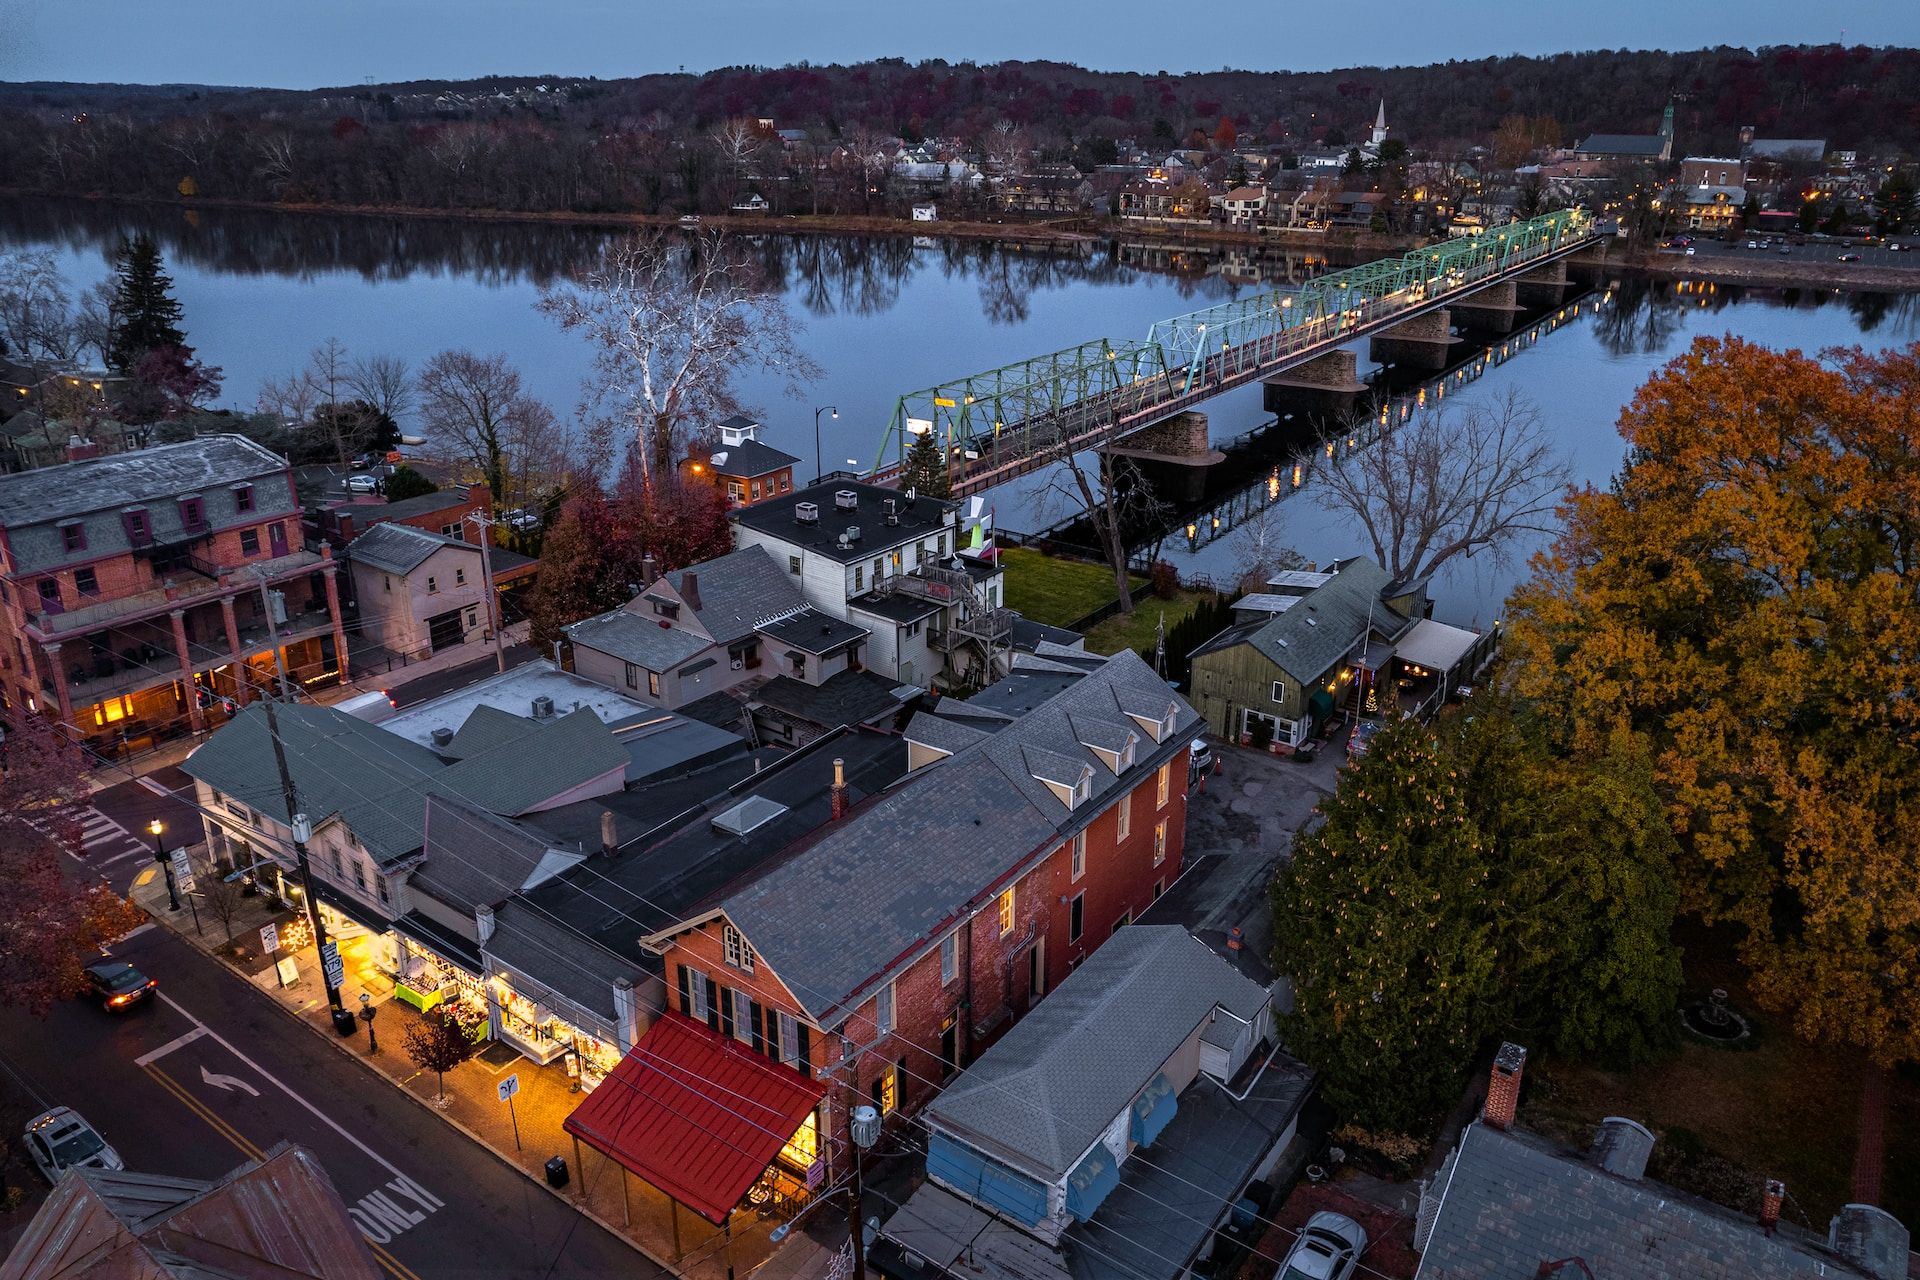 Aerial view of the towns of New Hope and Lambertville